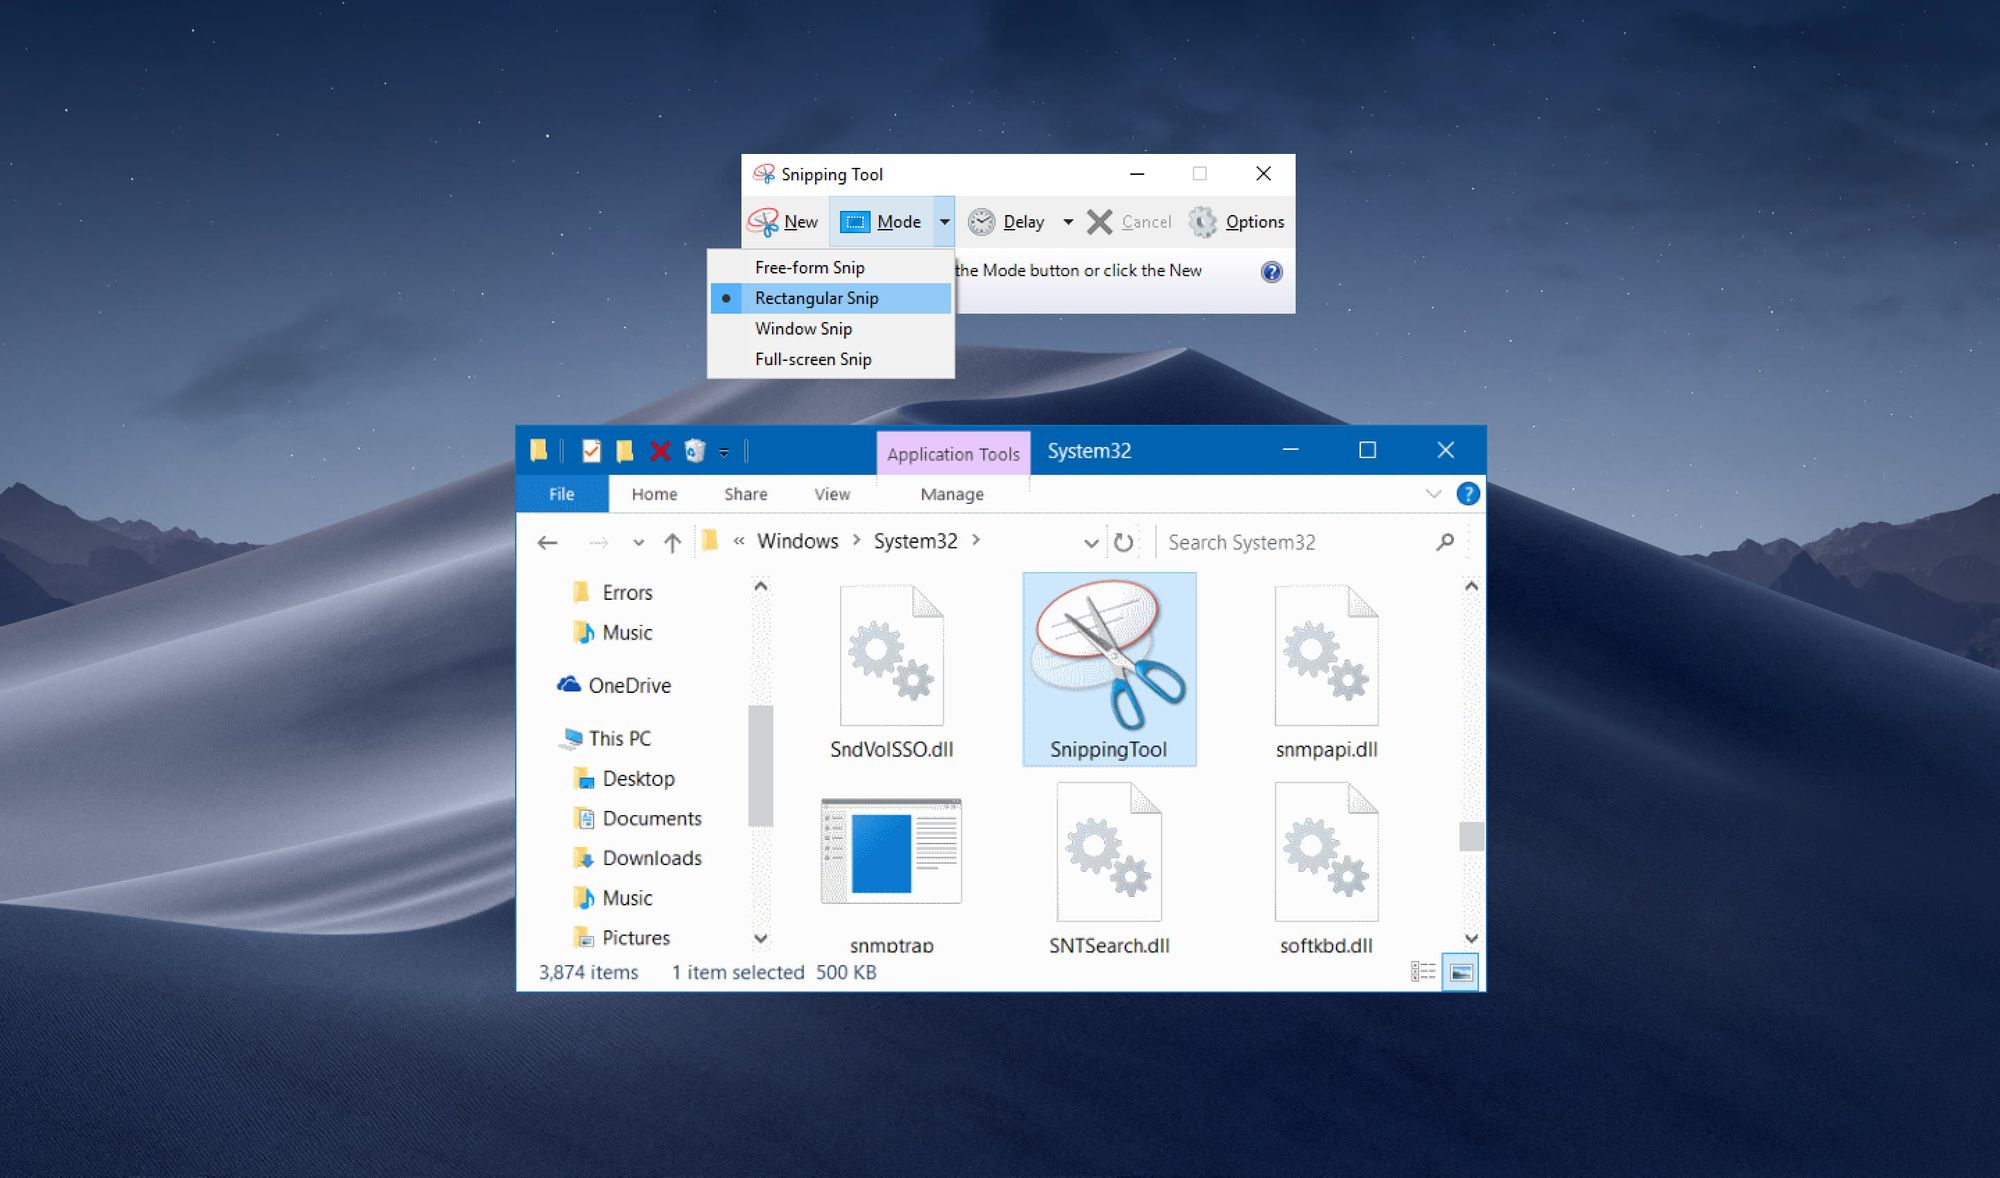 microsoft snipping tool download for windows 10